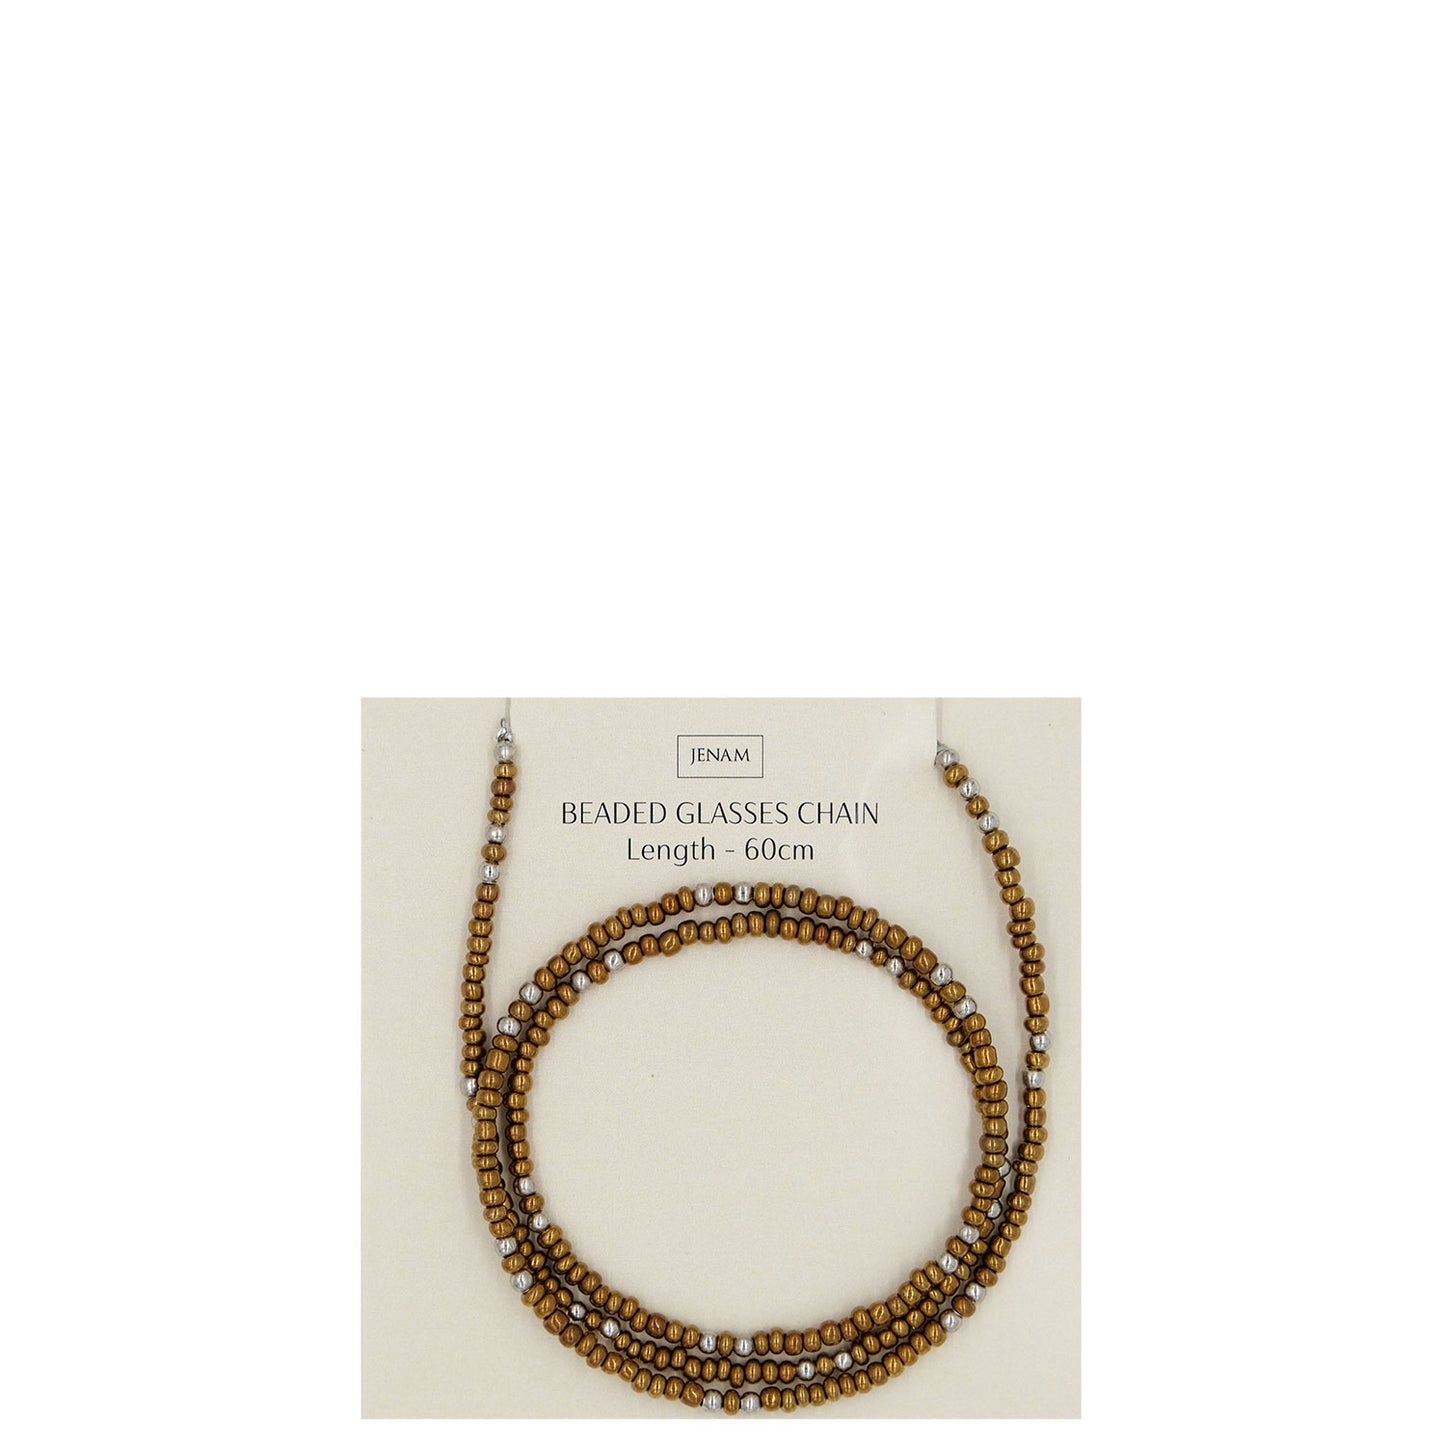 Beaded Glasses Chain (Gold & Silver) - 60cm